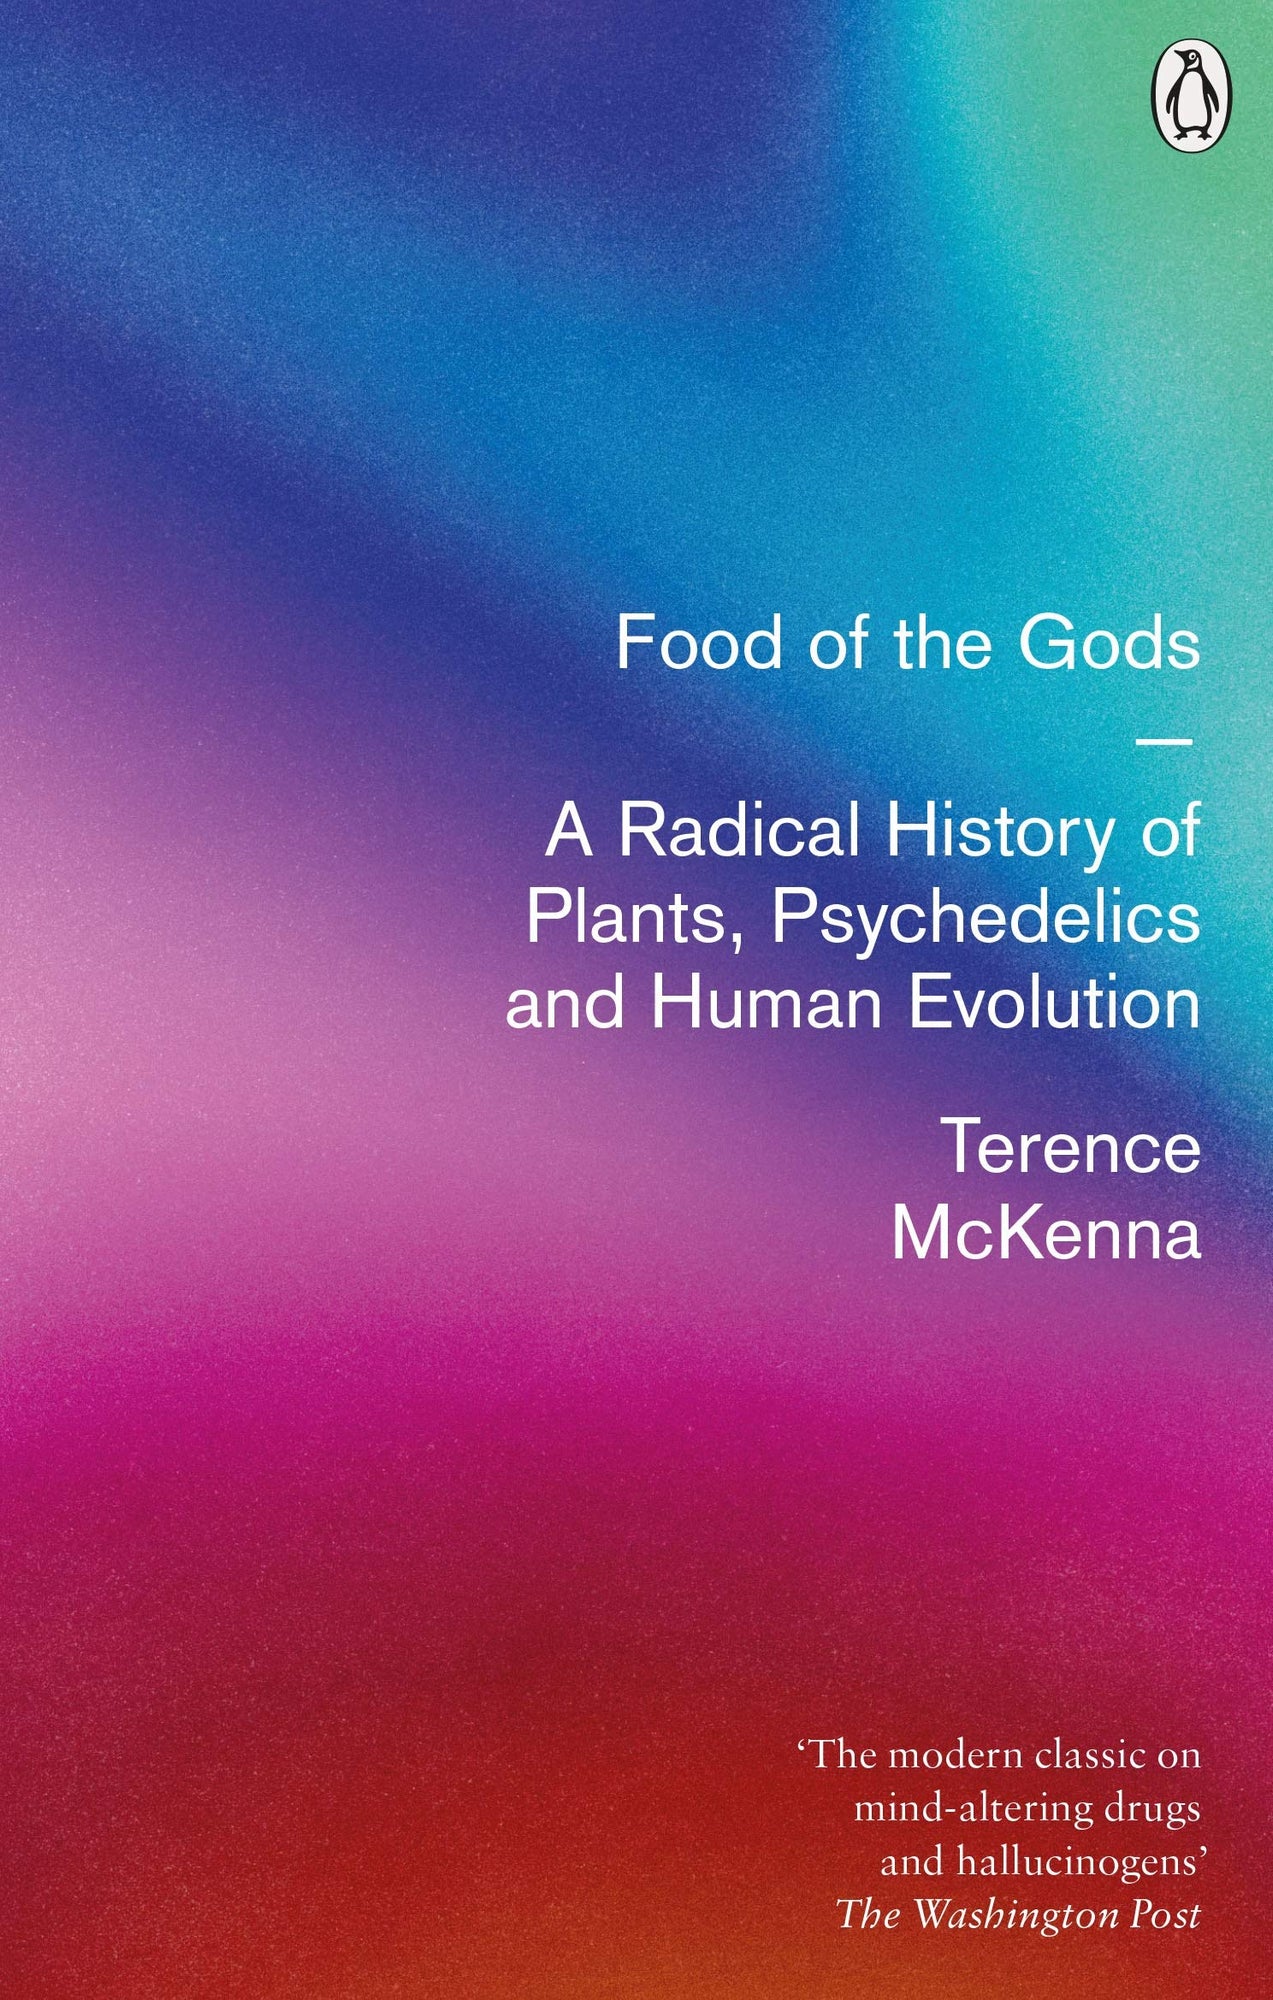 Food of the Gods: A Radical History of Plants, Psychedelics and Human Evolution